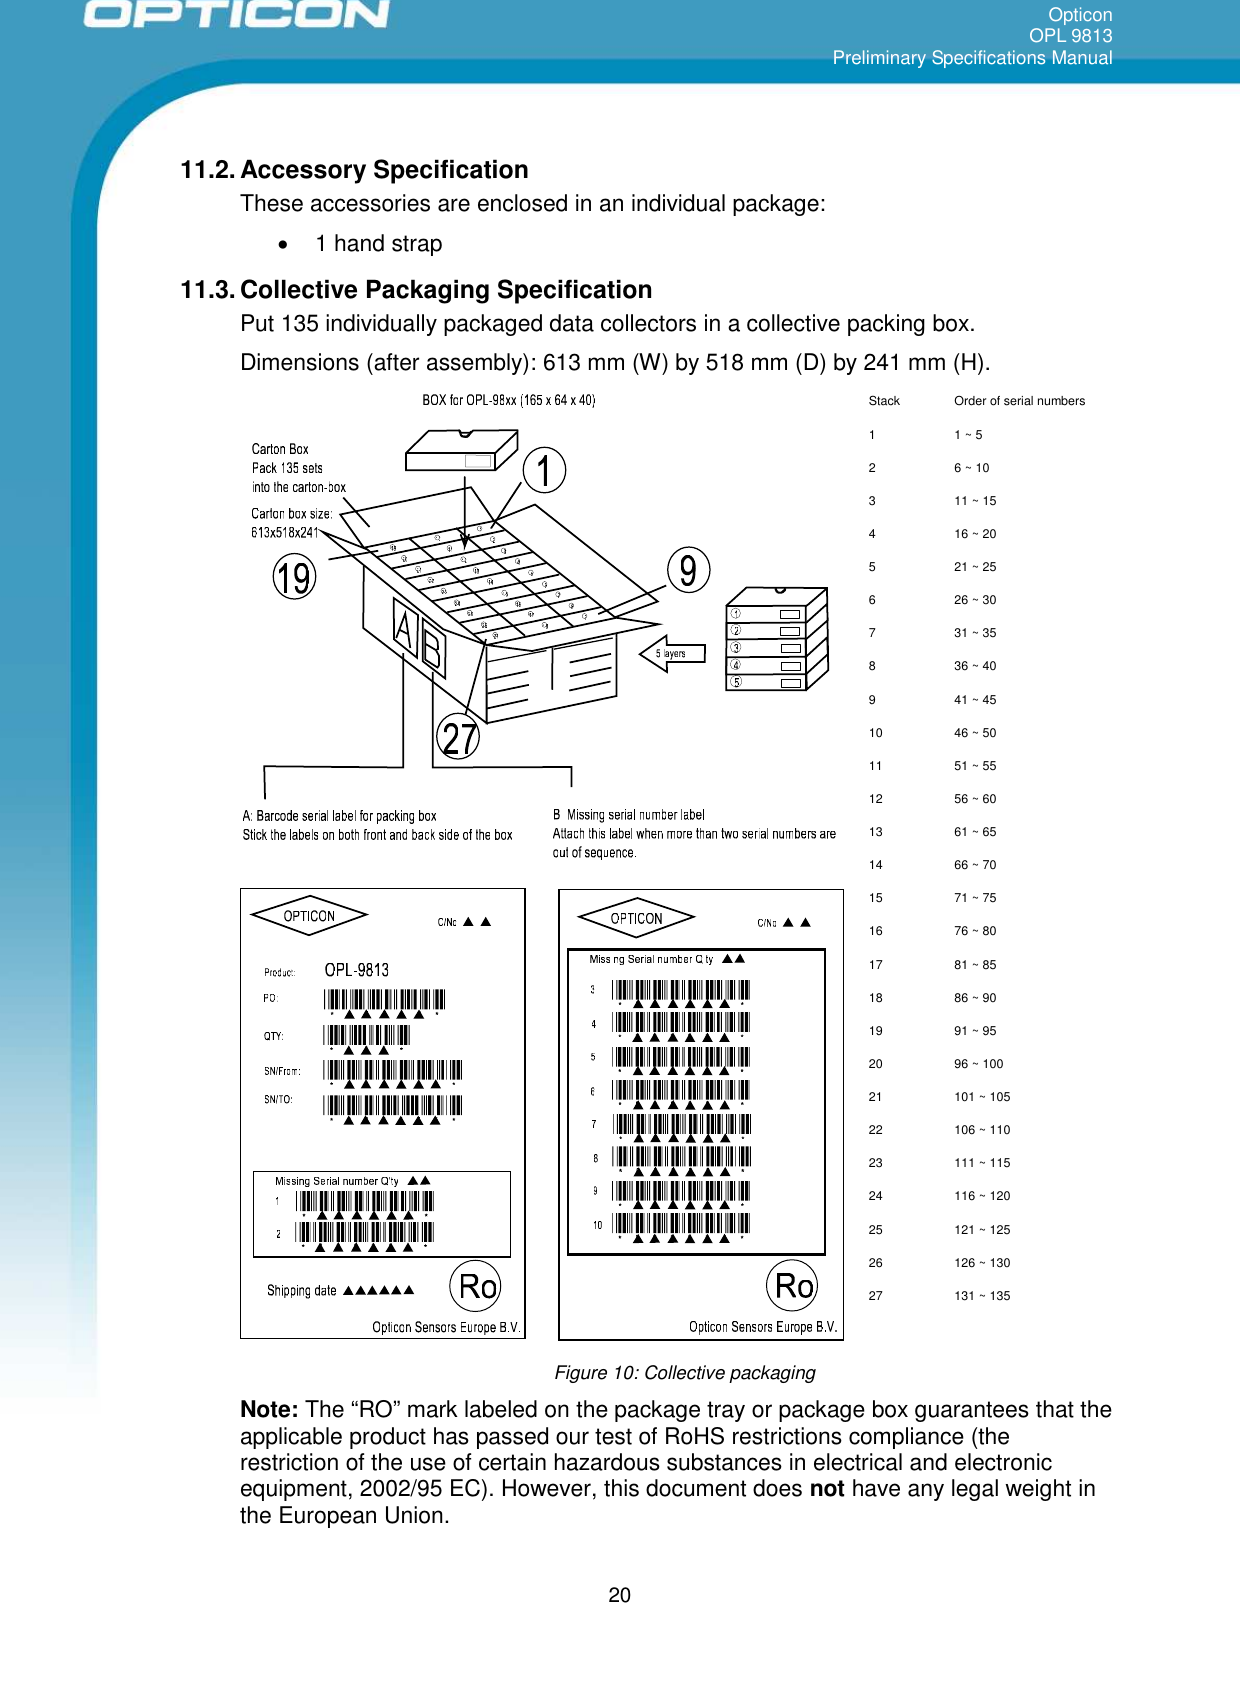 OpticonOPL 9813Preliminary Specifications Manual2011.2. Accessory SpecificationThese accessories are enclosed in an individual package:1 hand strap11.3. Collective Packaging SpecificationPut 135 individually packaged data collectors in a collective packing box.Dimensions (after assembly): 613 mm (W) by 518 mm (D) by 241 mm (H).Stack Order of serial numbers1 1 ~ 52 6 ~ 103 11 ~ 154 16 ~ 205 21 ~ 256 26 ~ 307 31 ~ 358 36 ~ 409 41 ~ 4510 46 ~ 5011 51 ~ 5512 56 ~ 6013 61 ~ 6514 66 ~ 7015 71 ~ 7516 76 ~ 8017 81 ~ 8518 86 ~ 9019 91 ~ 9520 96 ~ 10021 101 ~ 10522 106 ~ 11023 111 ~ 11524 116 ~ 12025 121 ~ 12526 126 ~ 13027 131 ~ 135Figure 10: Collective packagingNote: The “RO” mark labeled on the package tray or package box guarantees that theapplicable product has passed our test of RoHS restrictions compliance (therestriction of the use of certain hazardous substances in electrical and electronicequipment, 2002/95 EC). However, this document does not have any legal weight inthe European Union.